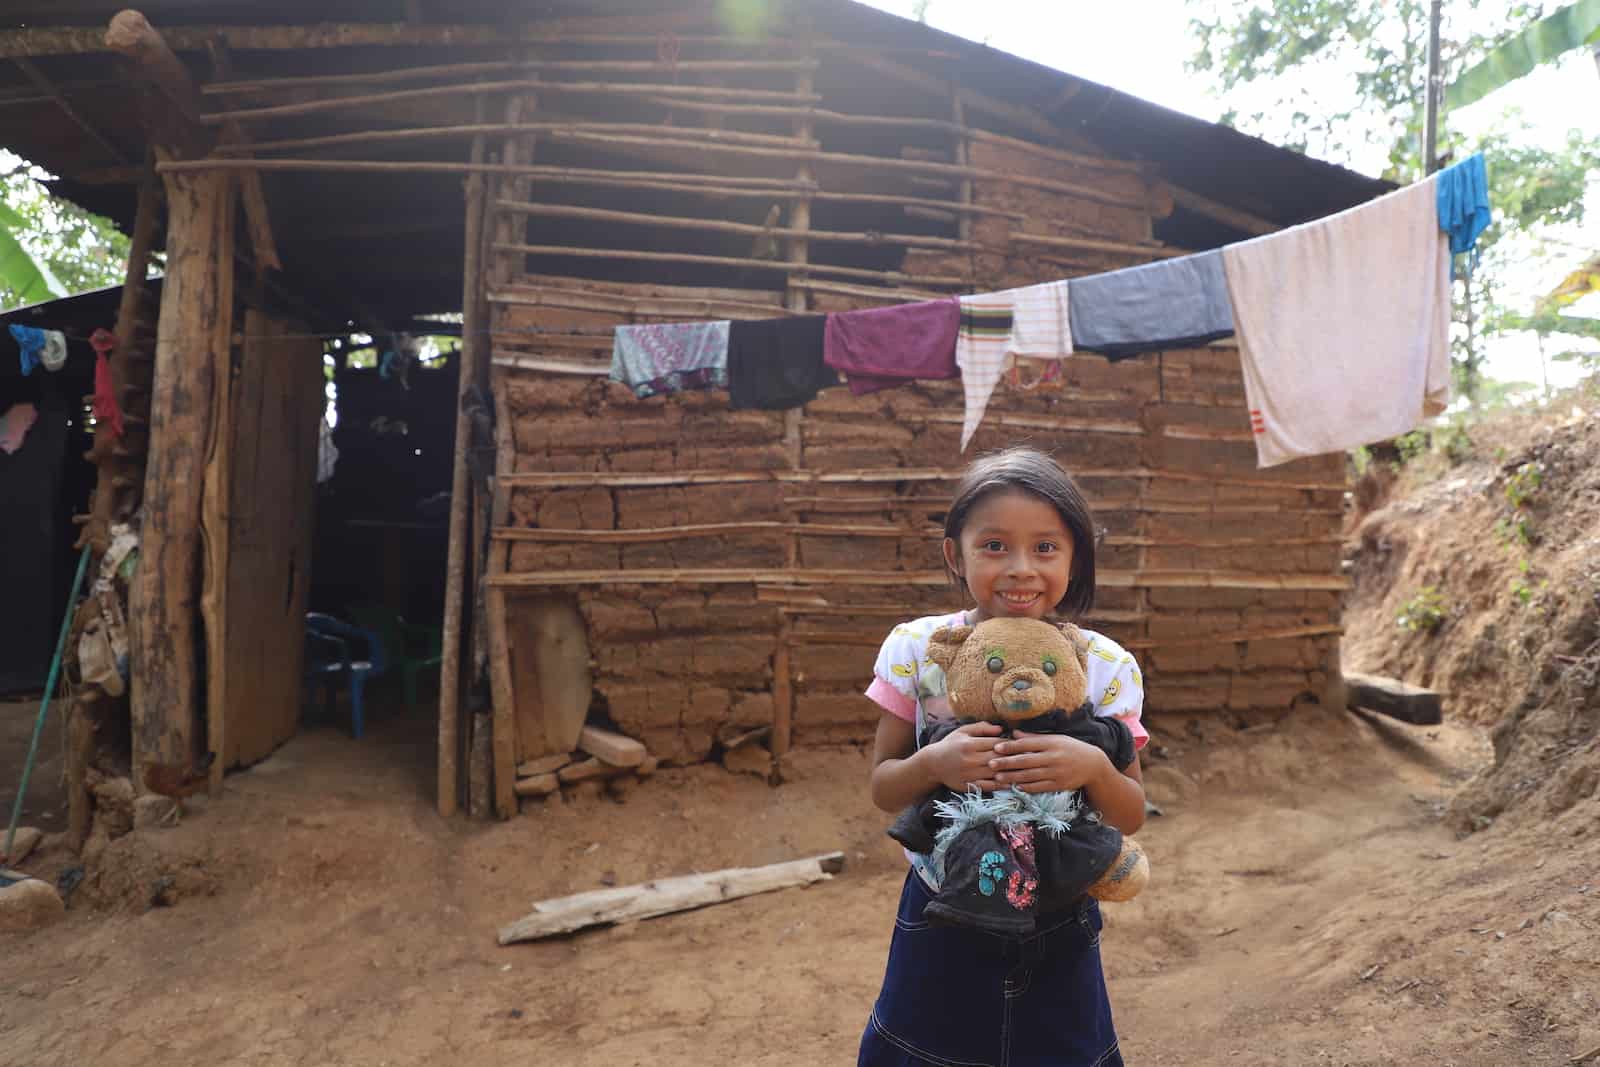 A girl holds a teddy bear, standing in front of a home in Central America made with mud and sticks. There are many holes in the walls. A laundry line hangs out front. 